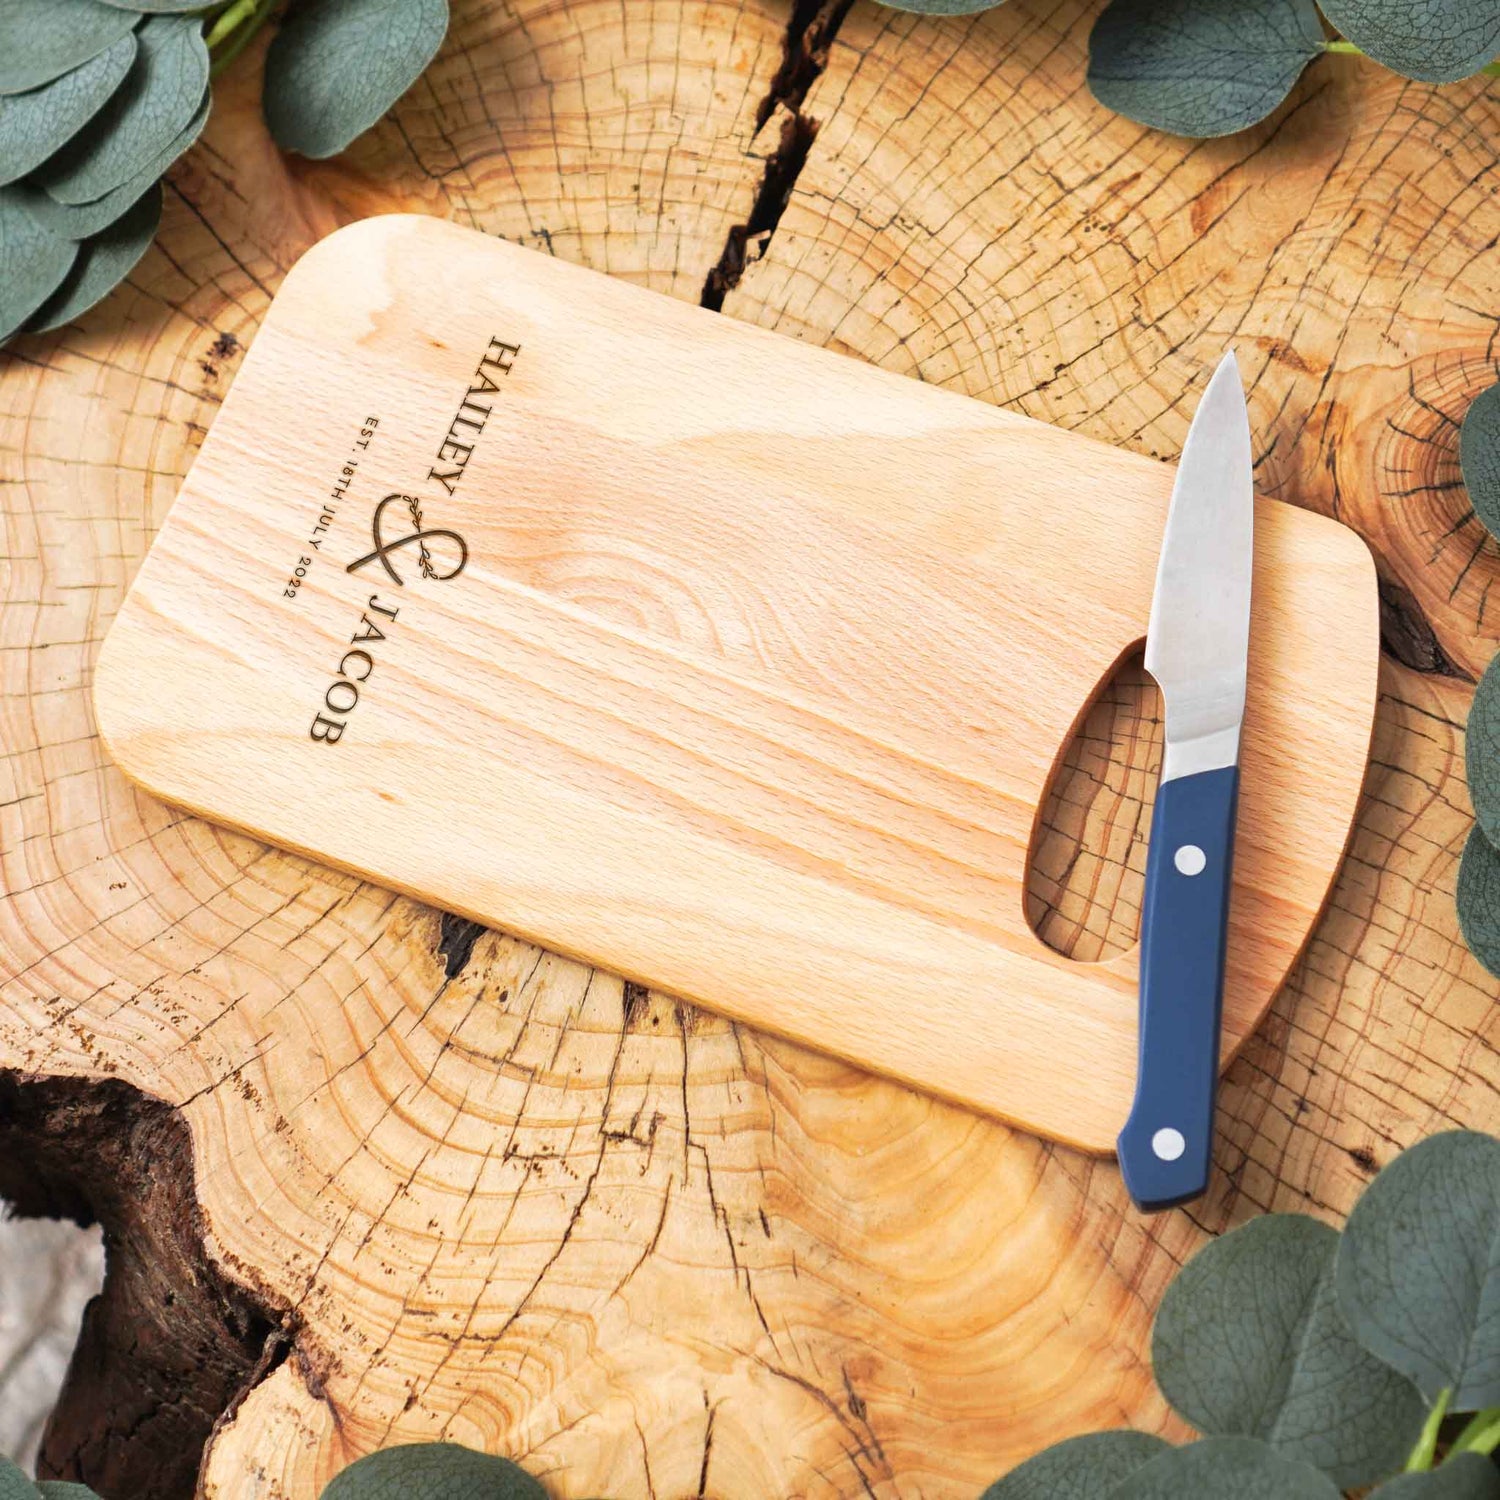 Customised wooden cutting board